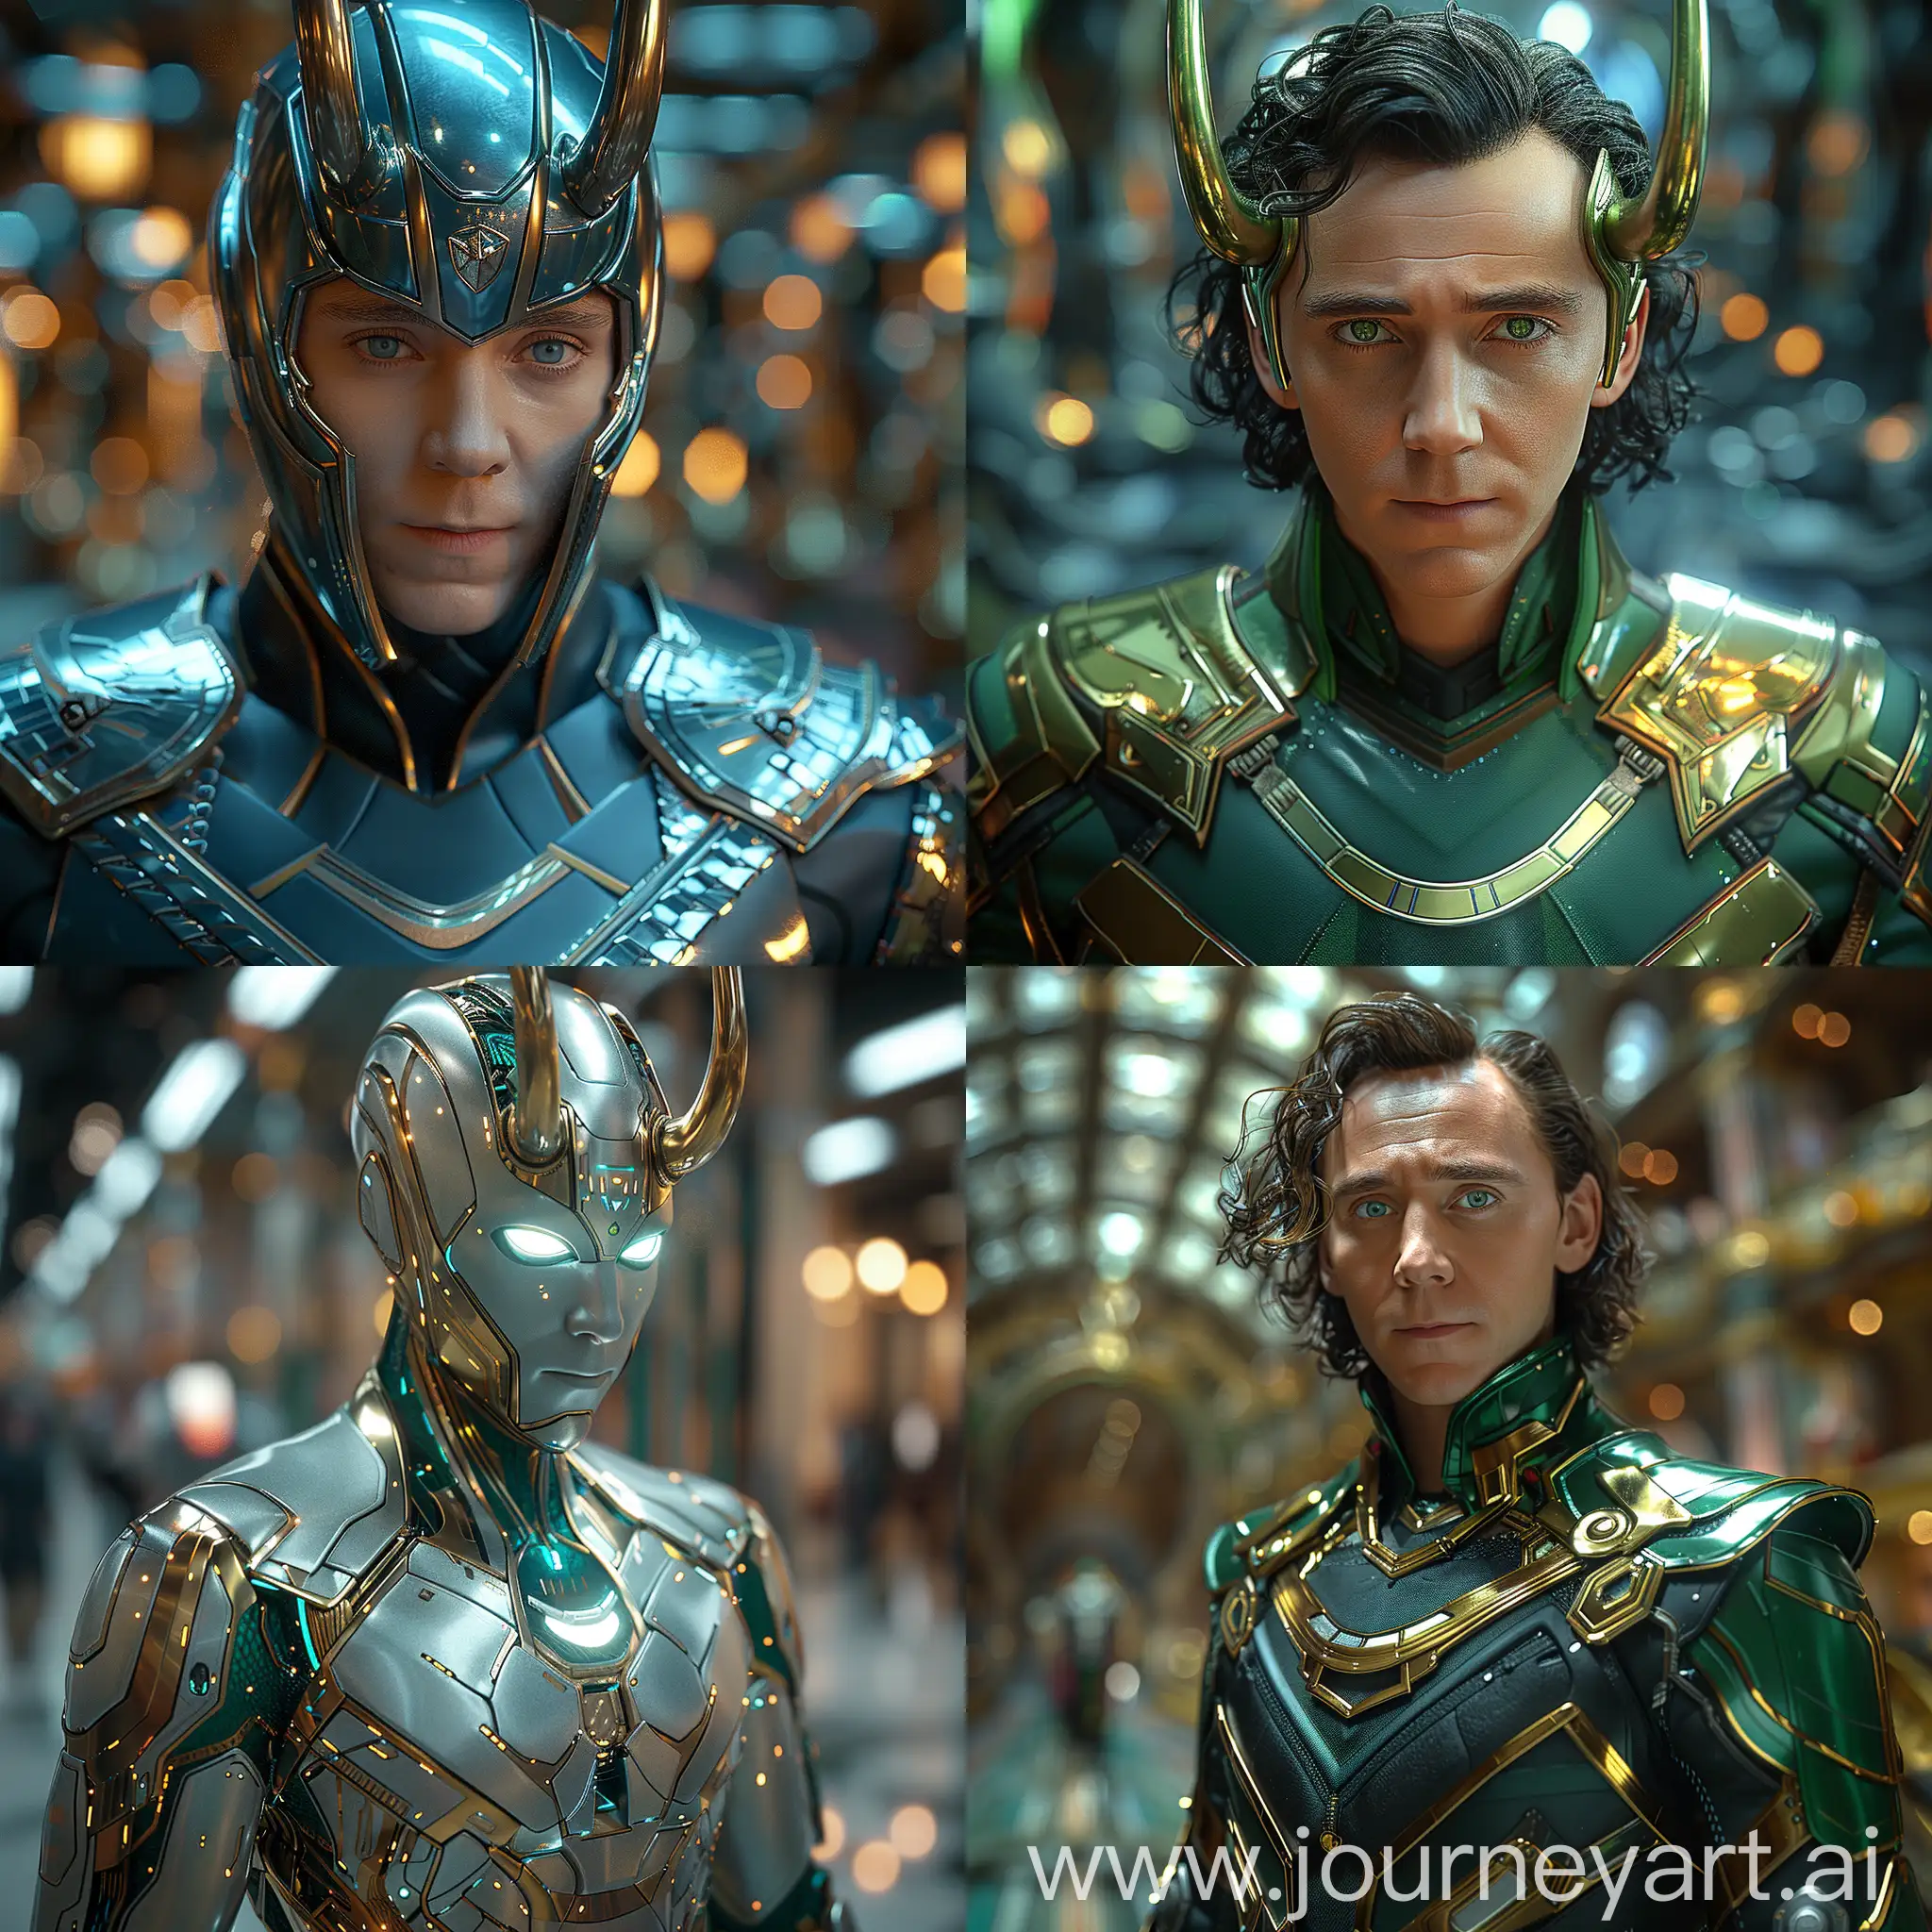 Futuristic-Marvel-Loki-UltraModern-Rendition-of-the-Iconic-Character